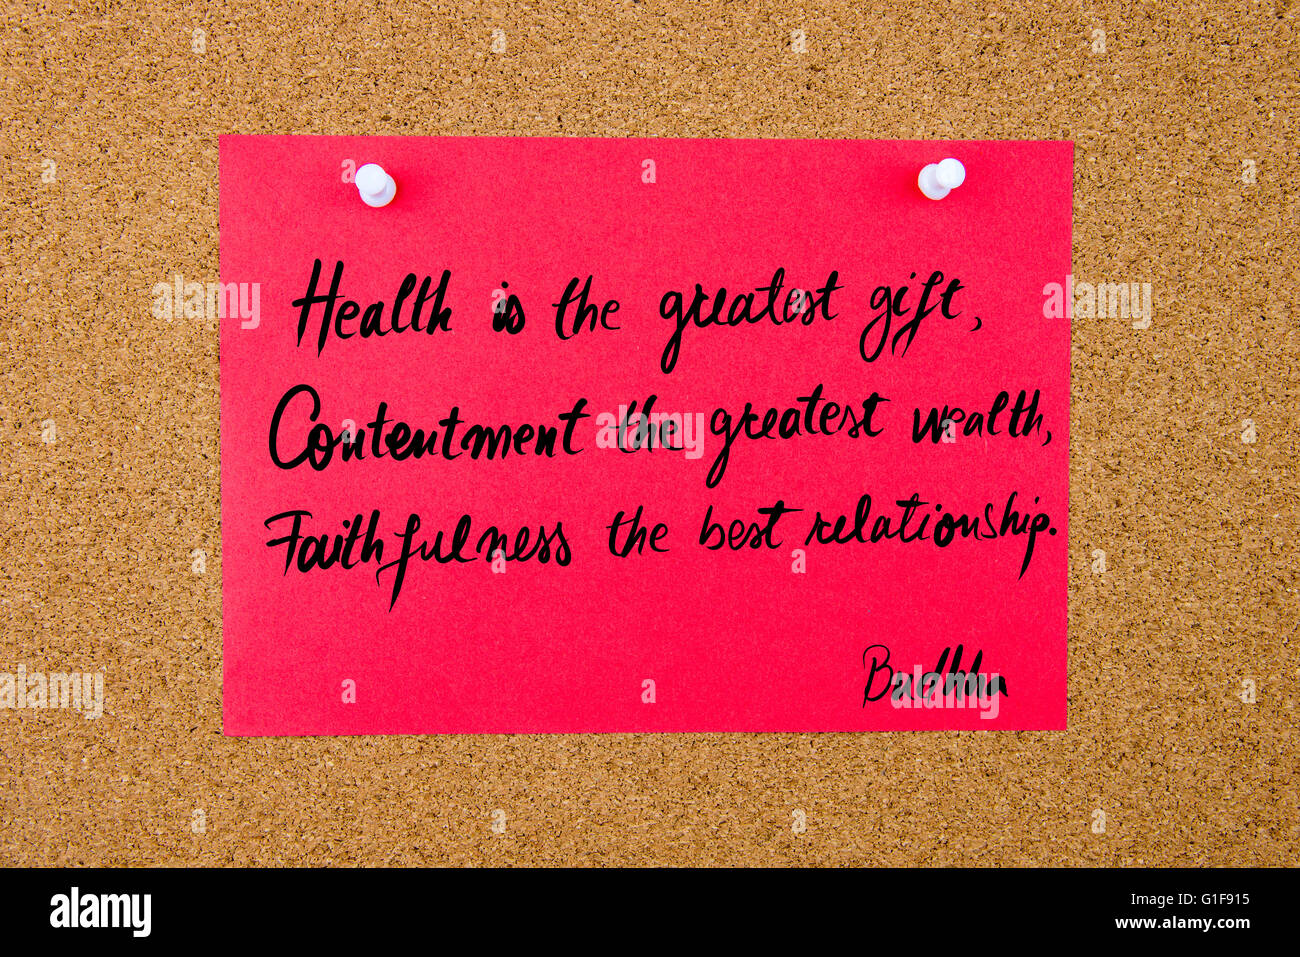 Quote Health is the greatest gift, Contentment the greatest wealth, Faithfulness the best relationship by Buddha, written on red paper note pinned on cork board with white thumbtacks, copy space available Stock Photo